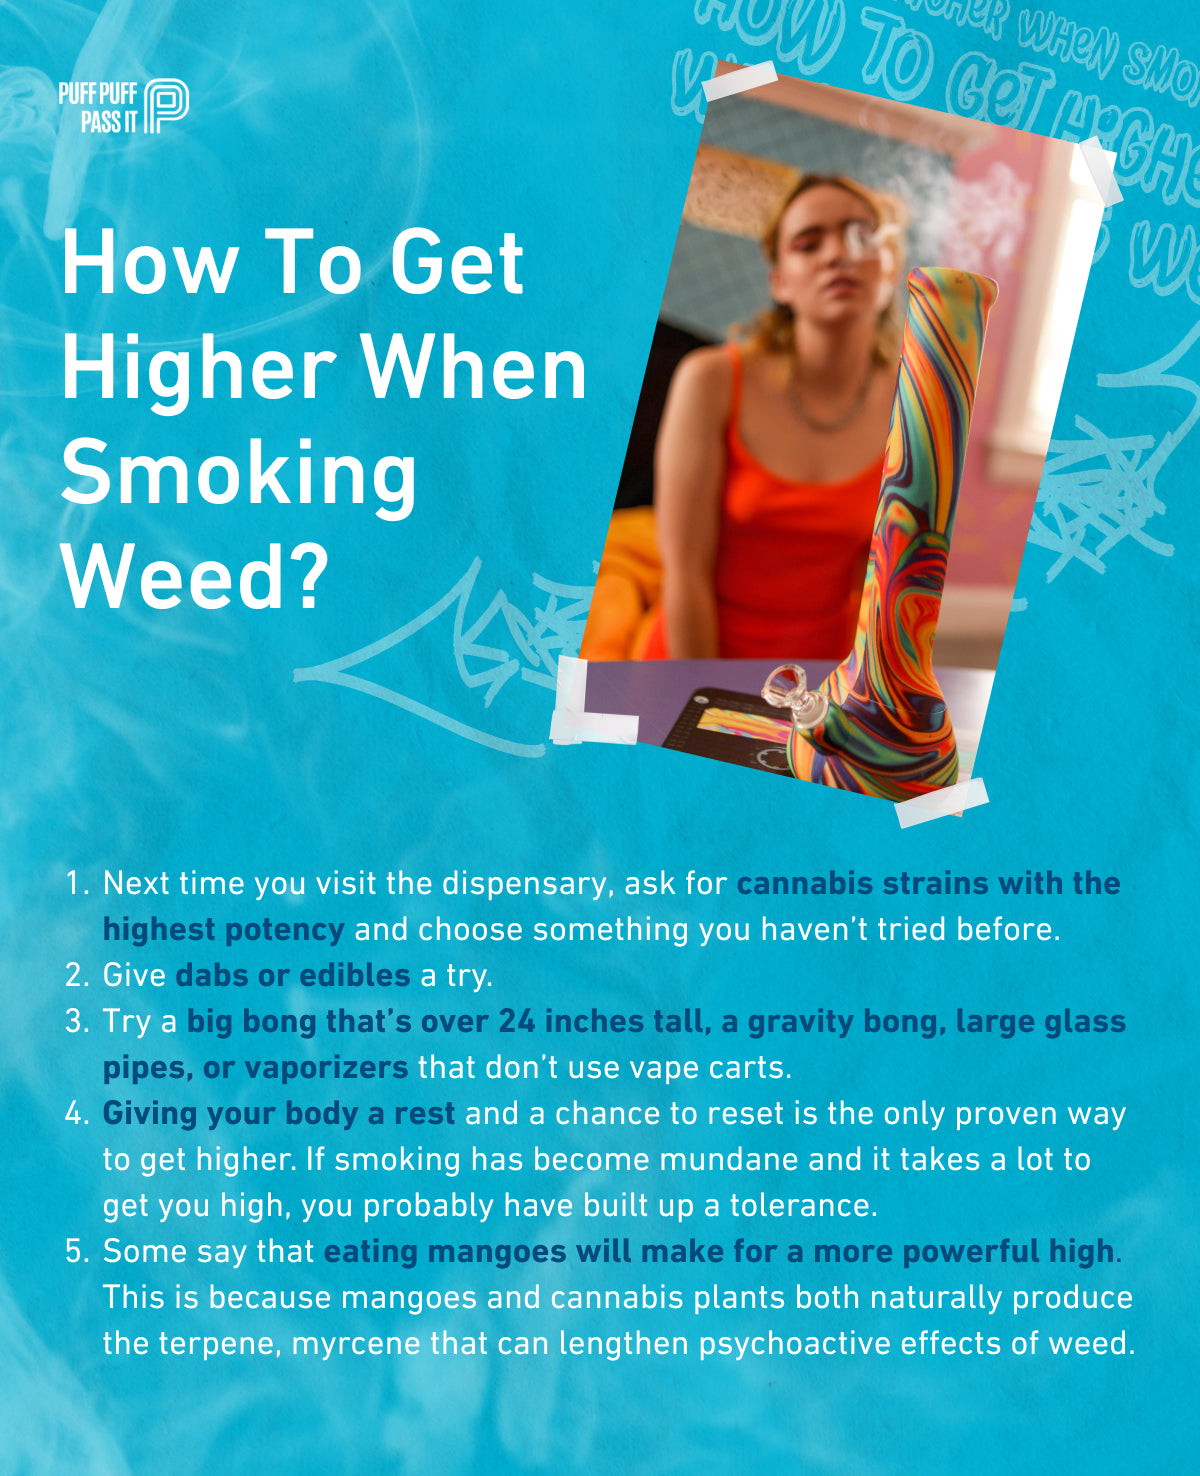 How to get higher when smoking weed?